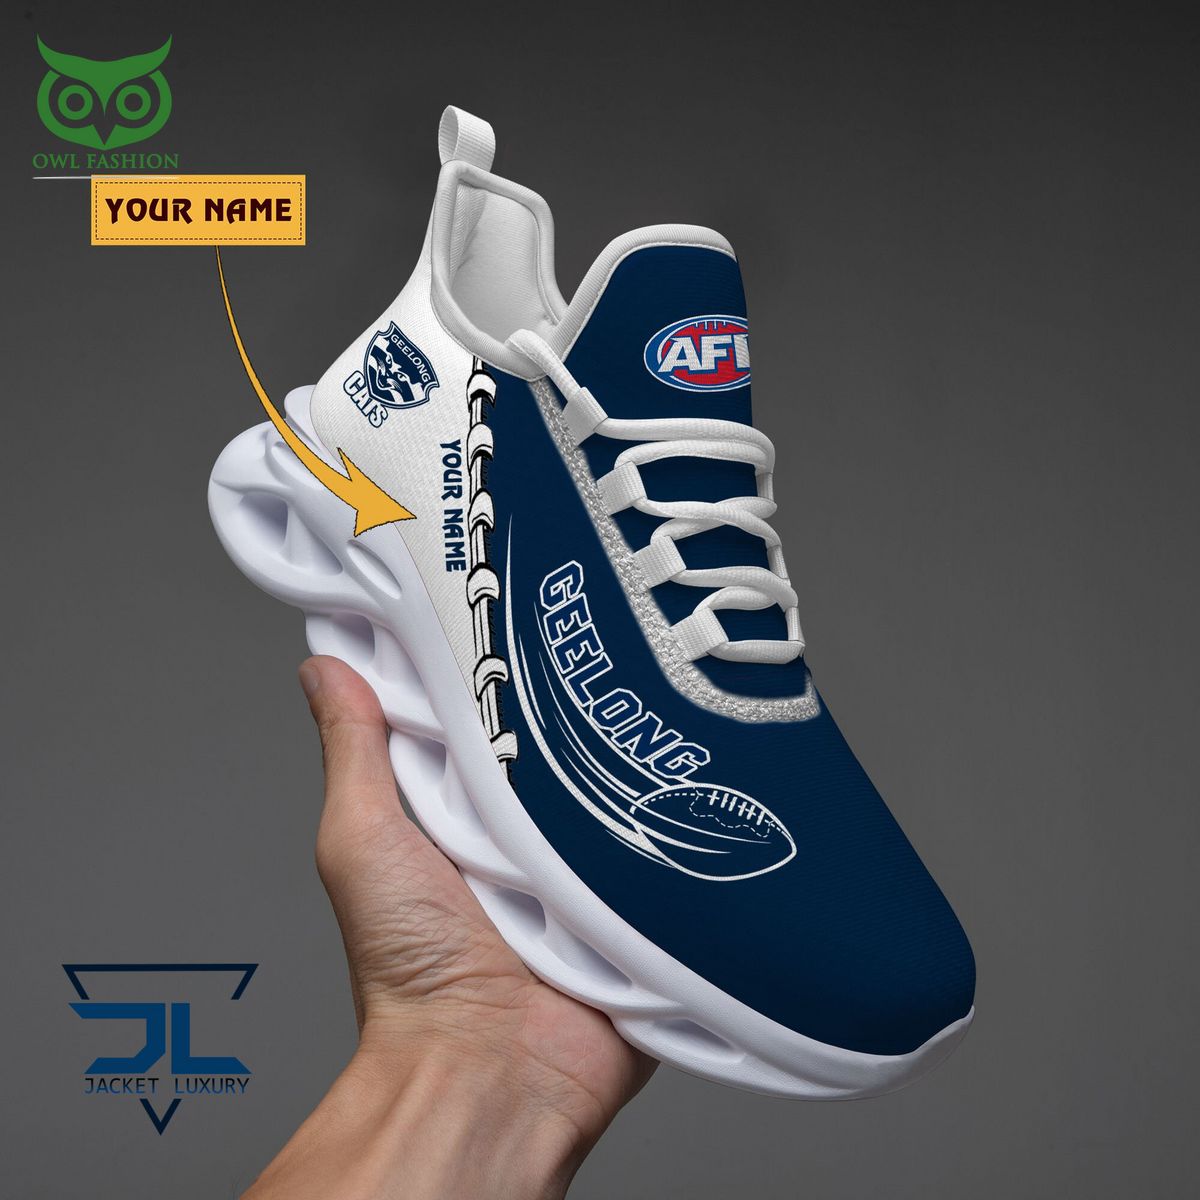 geelong football club afl personalized max soul shoes 1 HQEdD